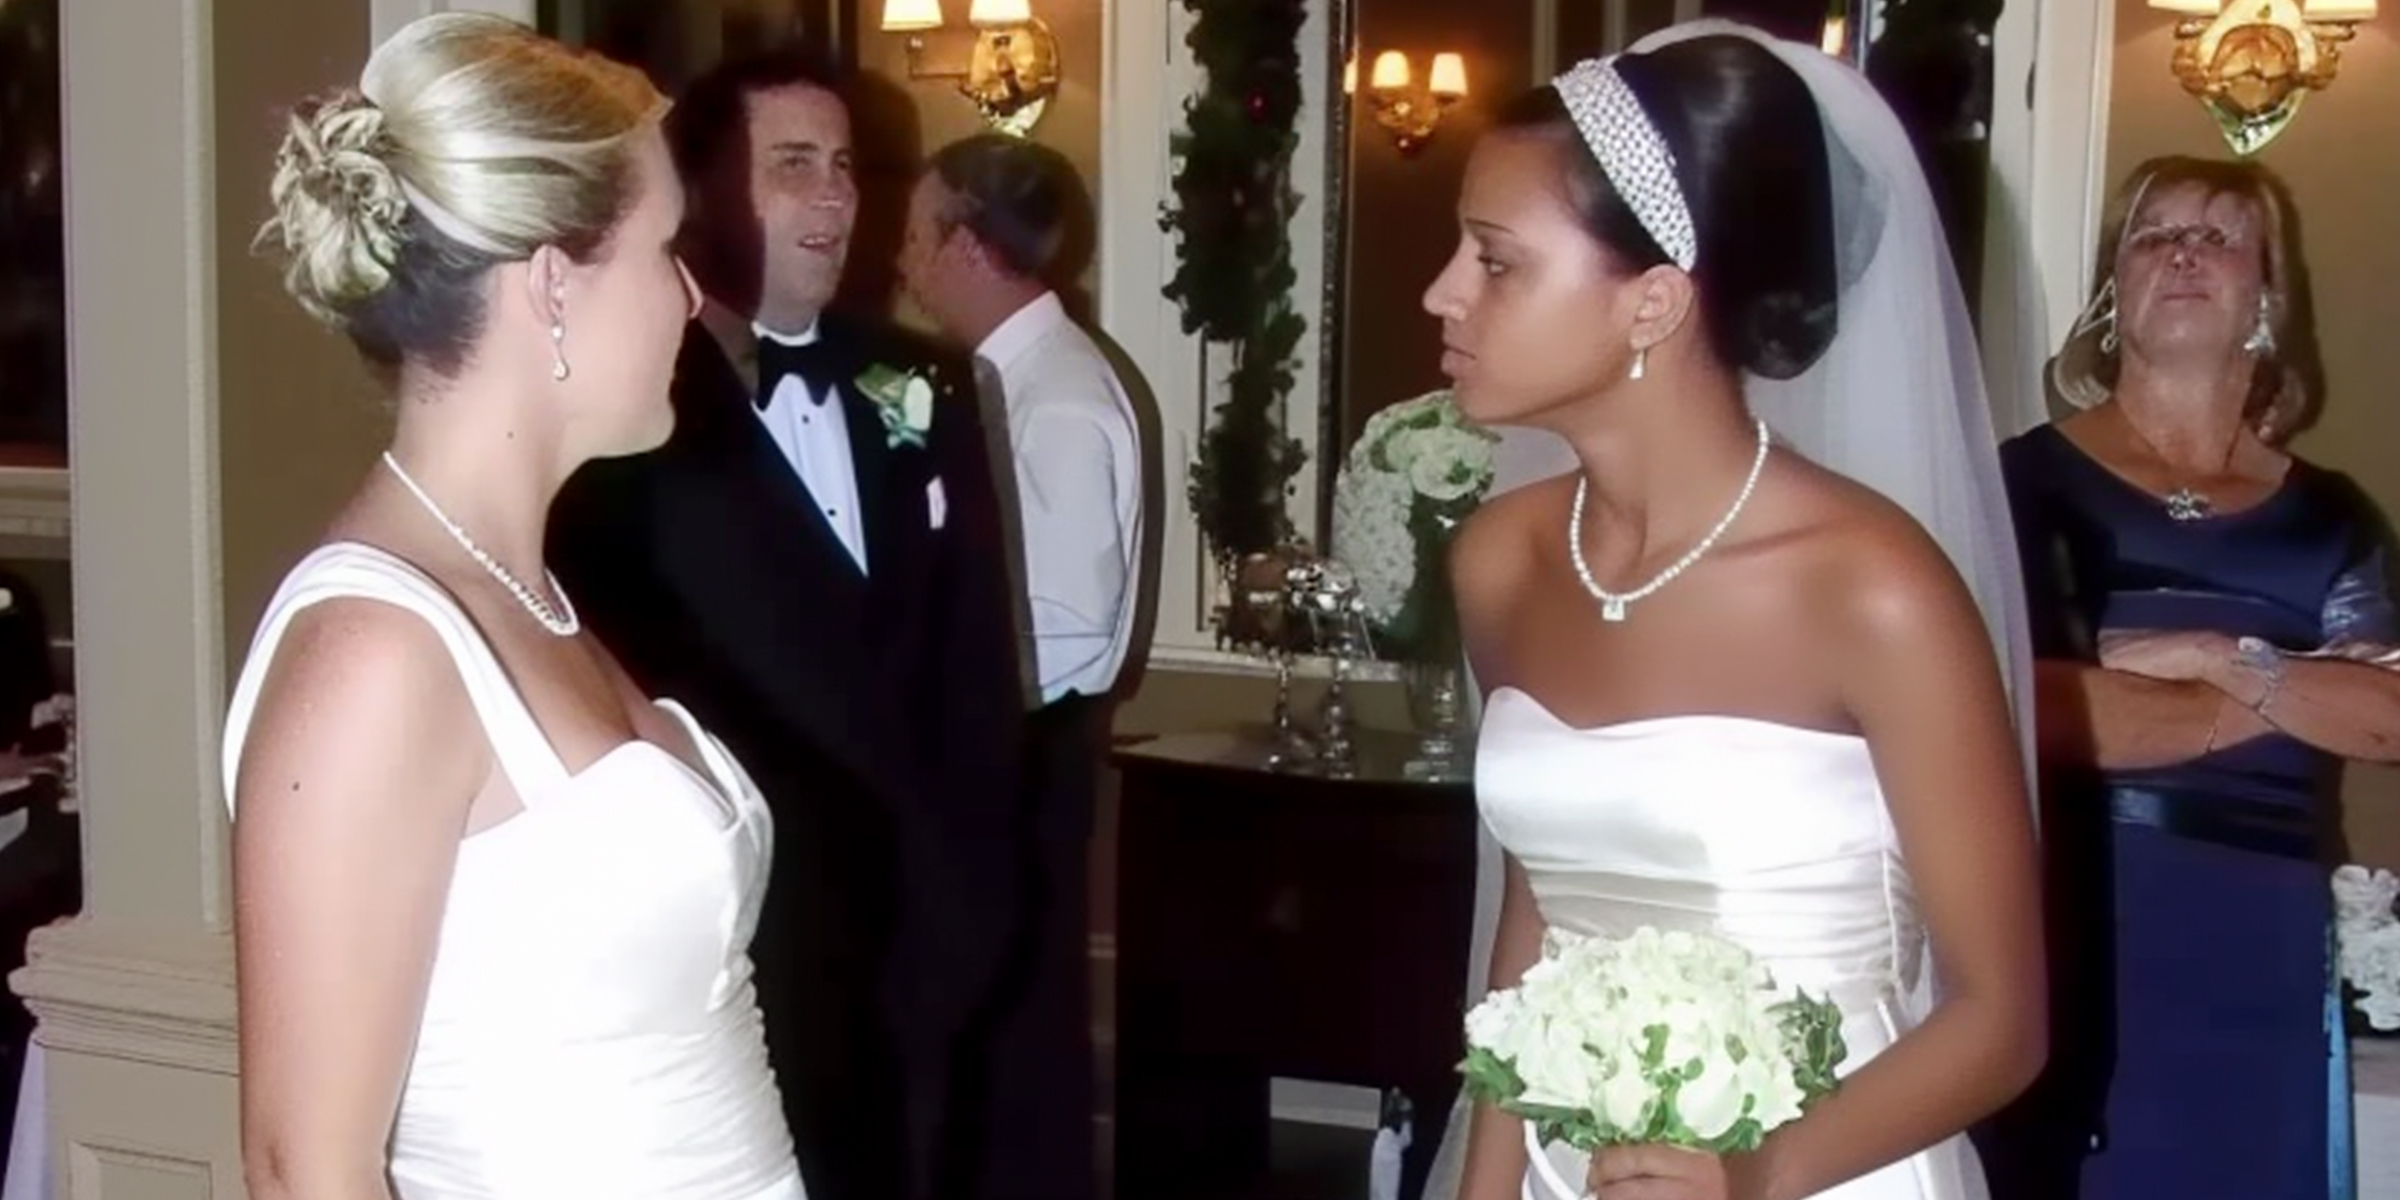 Stunned bride looking at another woman in wedding dress | Source: Amomama